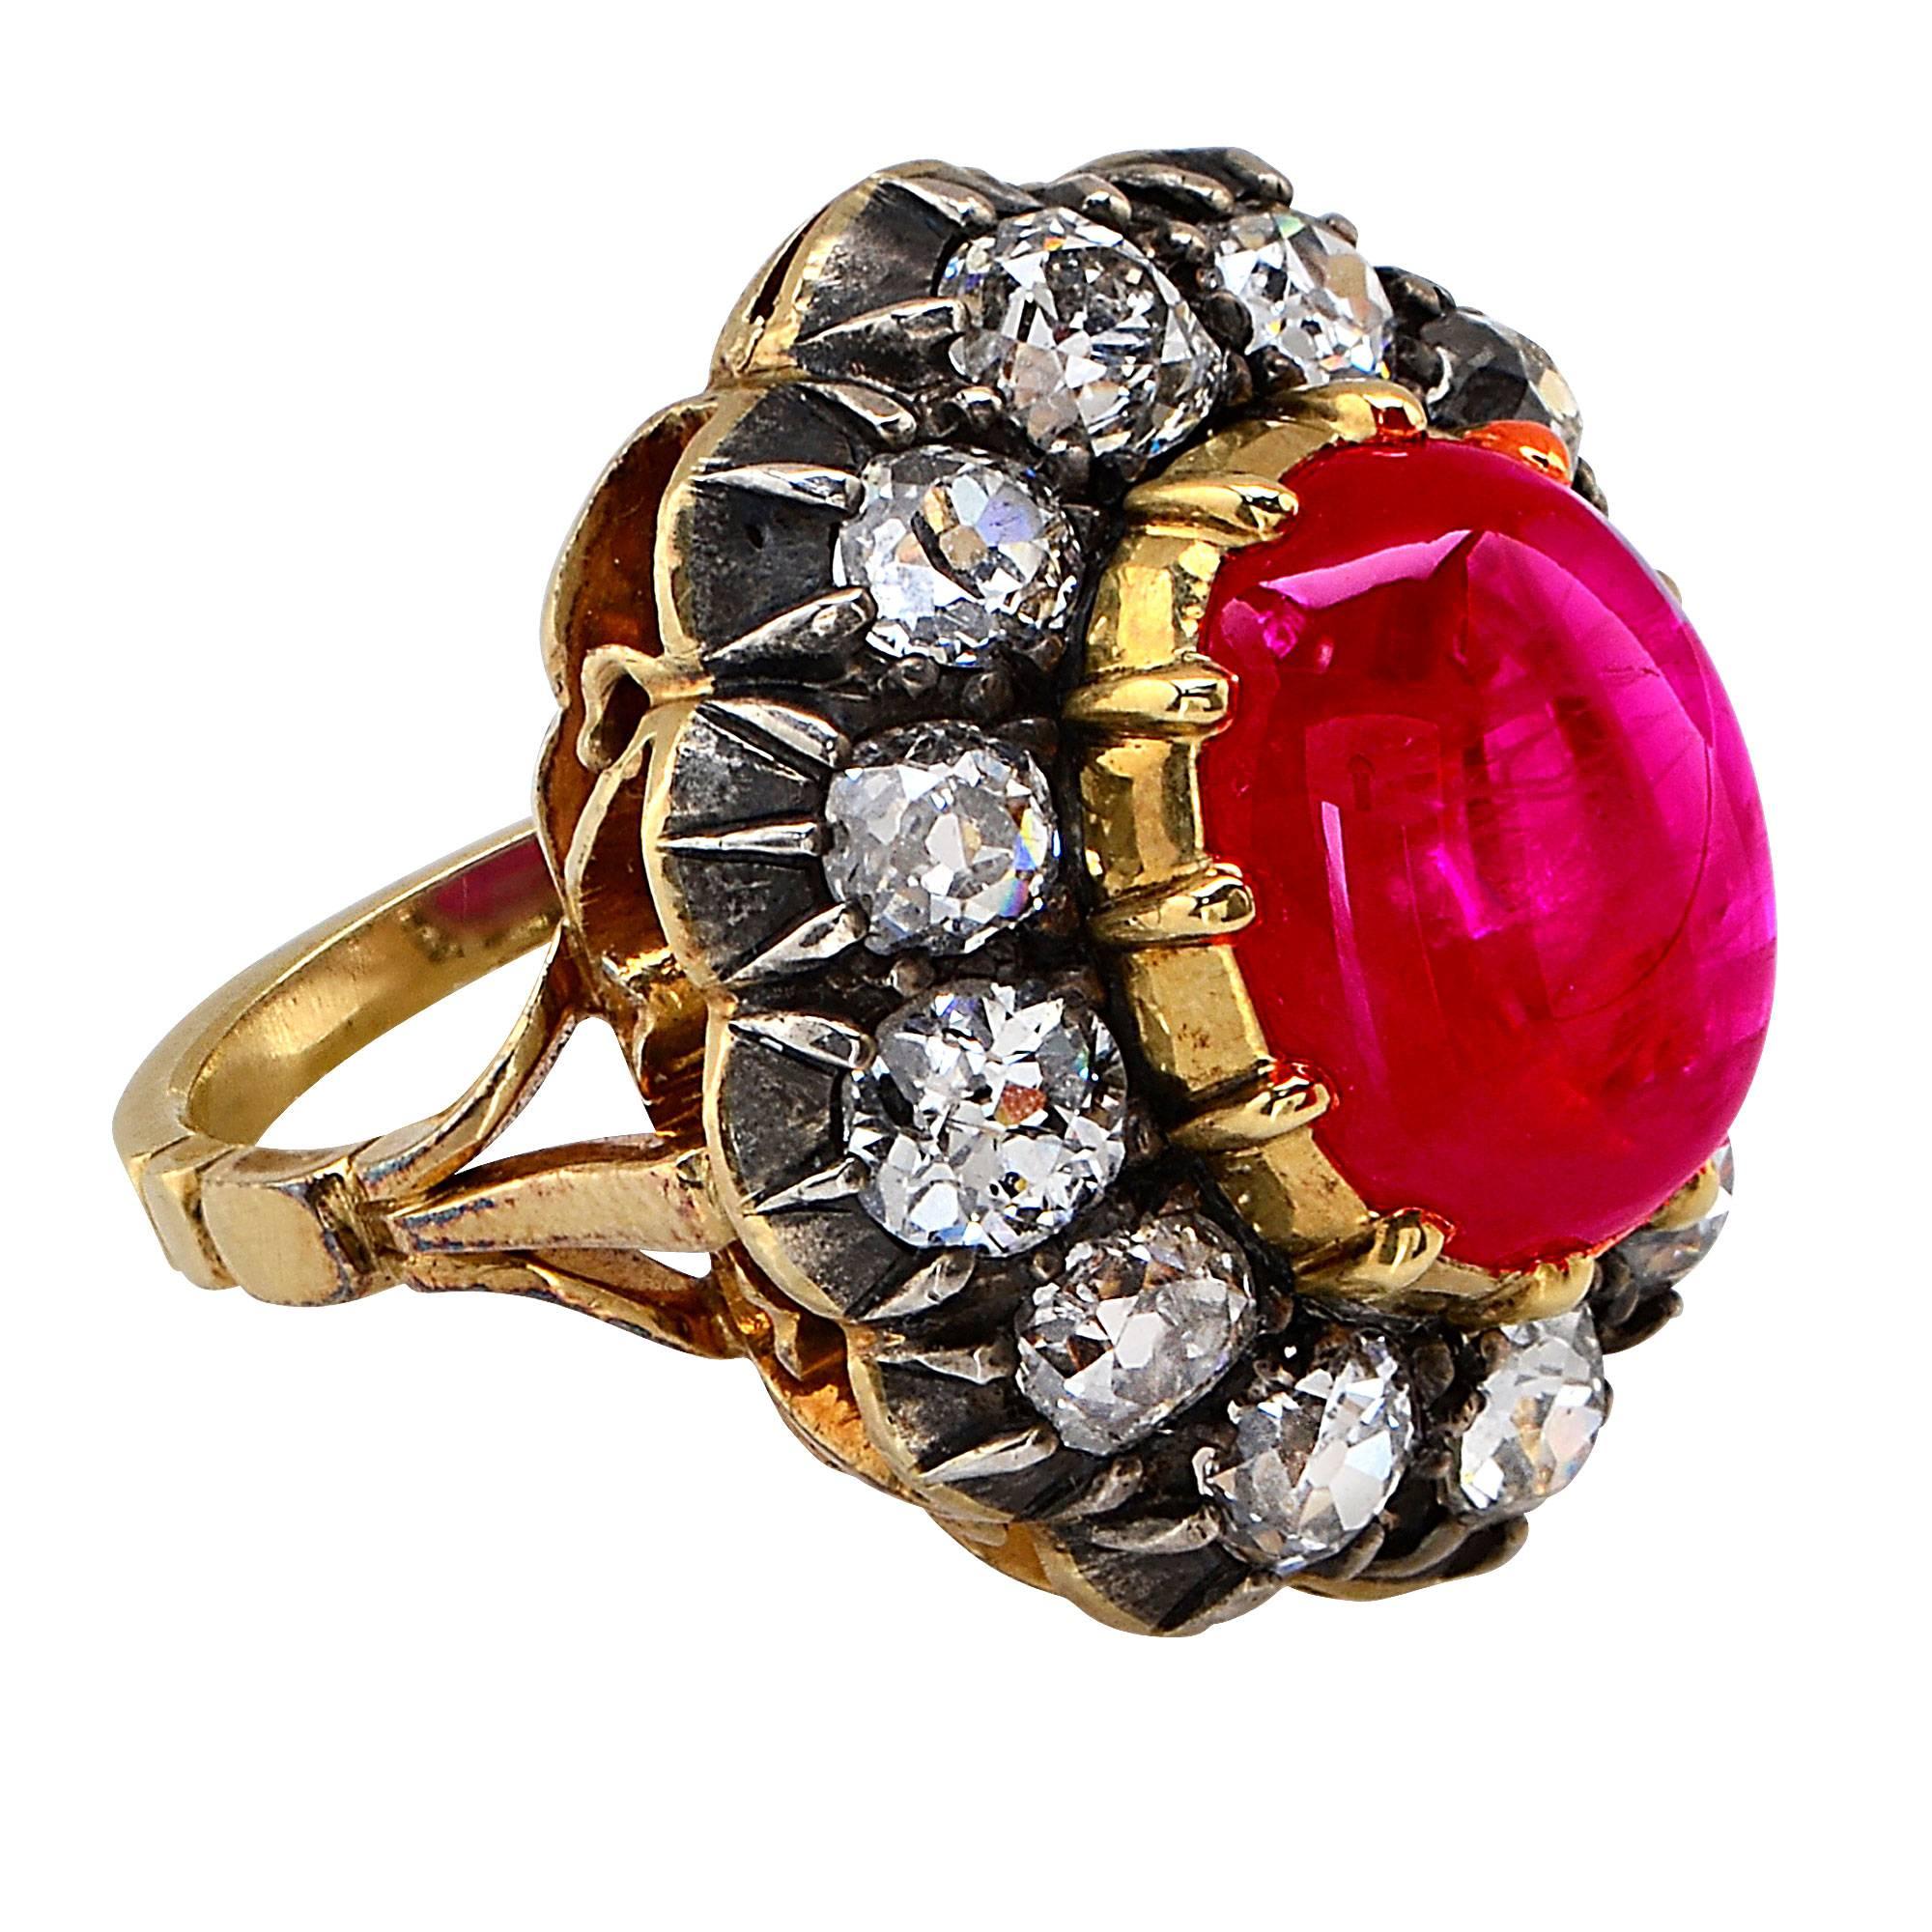 18 Karat Yellow Gold Ruby and Diamond Ring Featuring a 12.84 Carat Heated Burma Cabochon Ruby Surrounded by 12 Old European Cut Diamonds with an Estimated Total Weight of 4 Carats.

Ring Size: 6.25

This Ruby Ring is Accompanied by a GIA Report